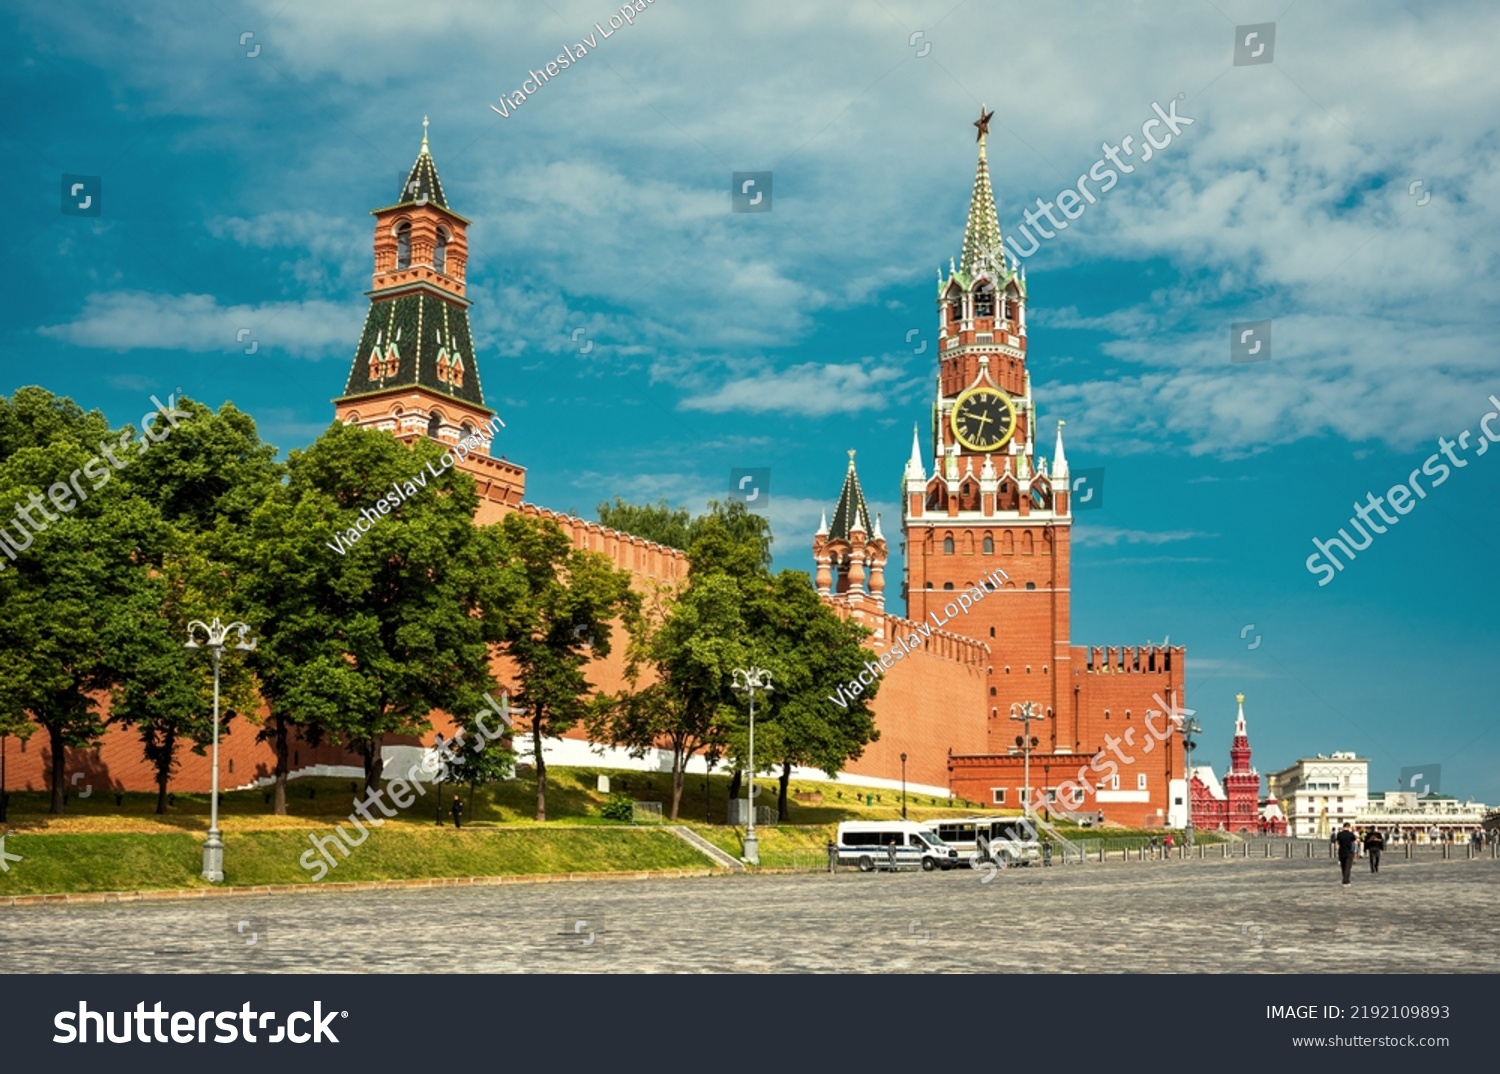 Moscow Kremlin on Red Square, Russia. Scenery of historical place, old nice Moscow landmark. Scenic view of travel destination, famous Russian monument. Sightseeing, vacation and tourism in Russia. #2192109893